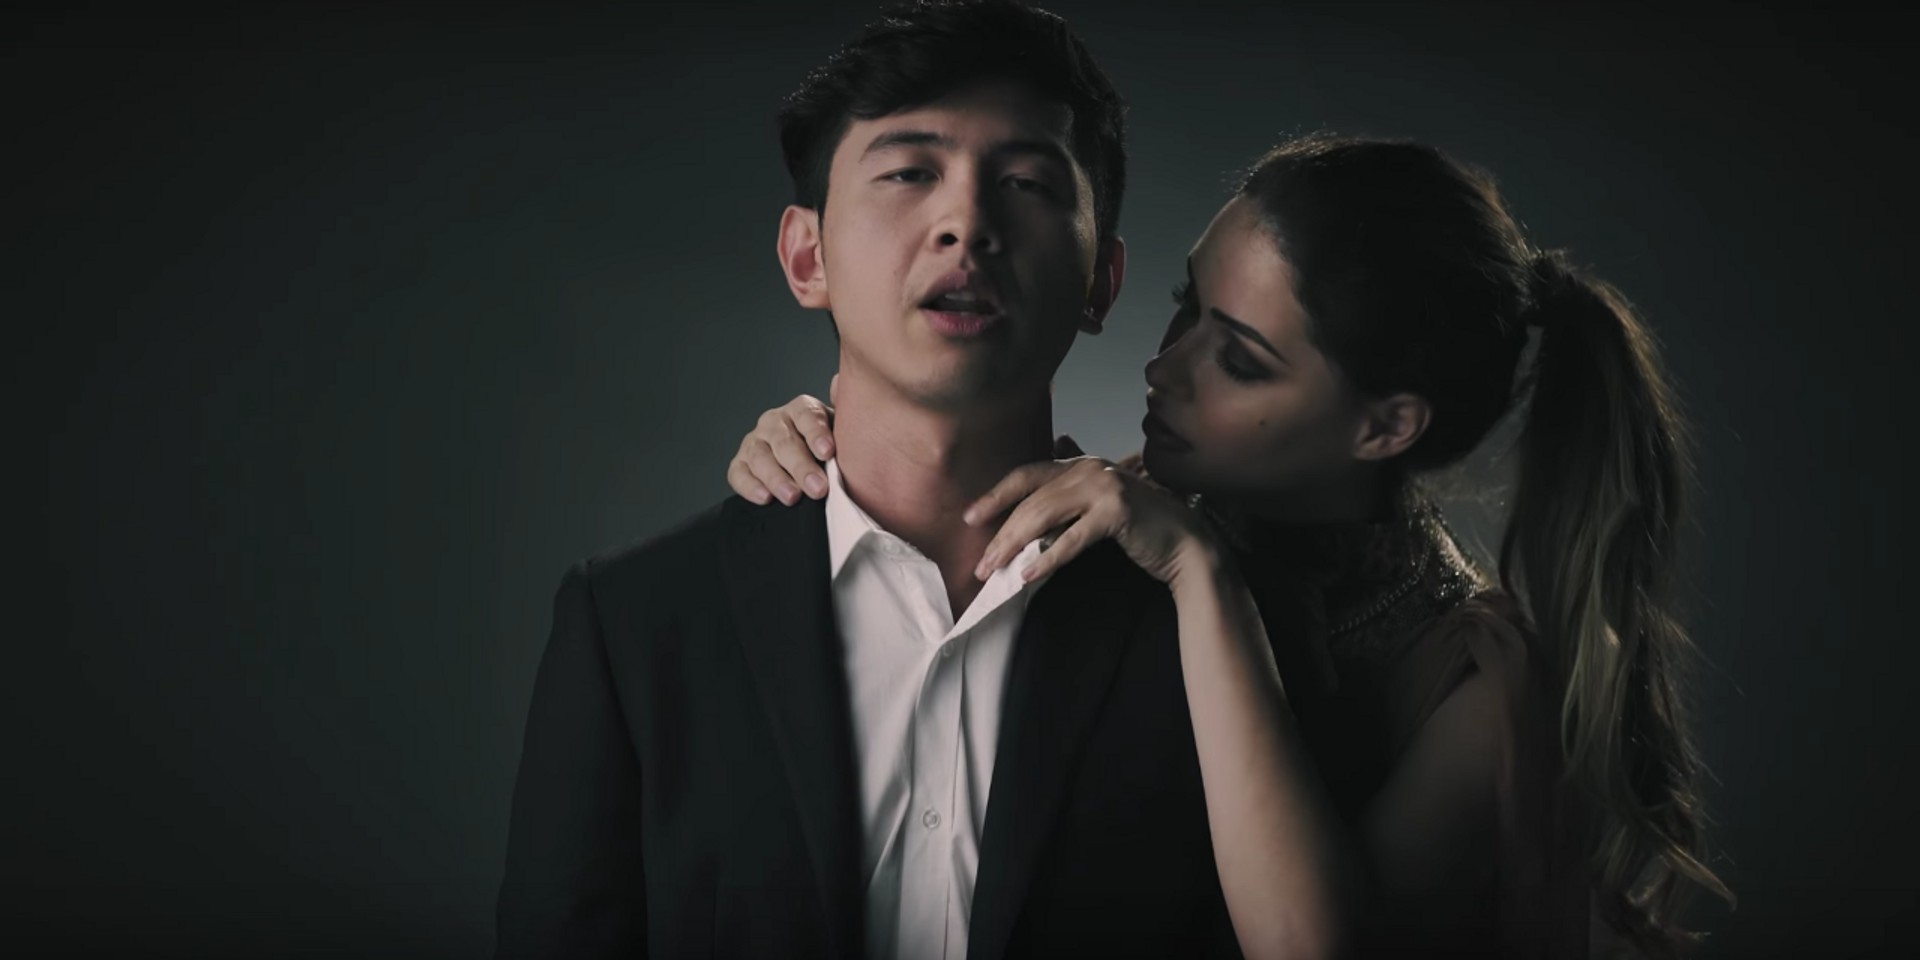 Curtismith enlists Daiana Menezes to star in new music video,"West" - watch